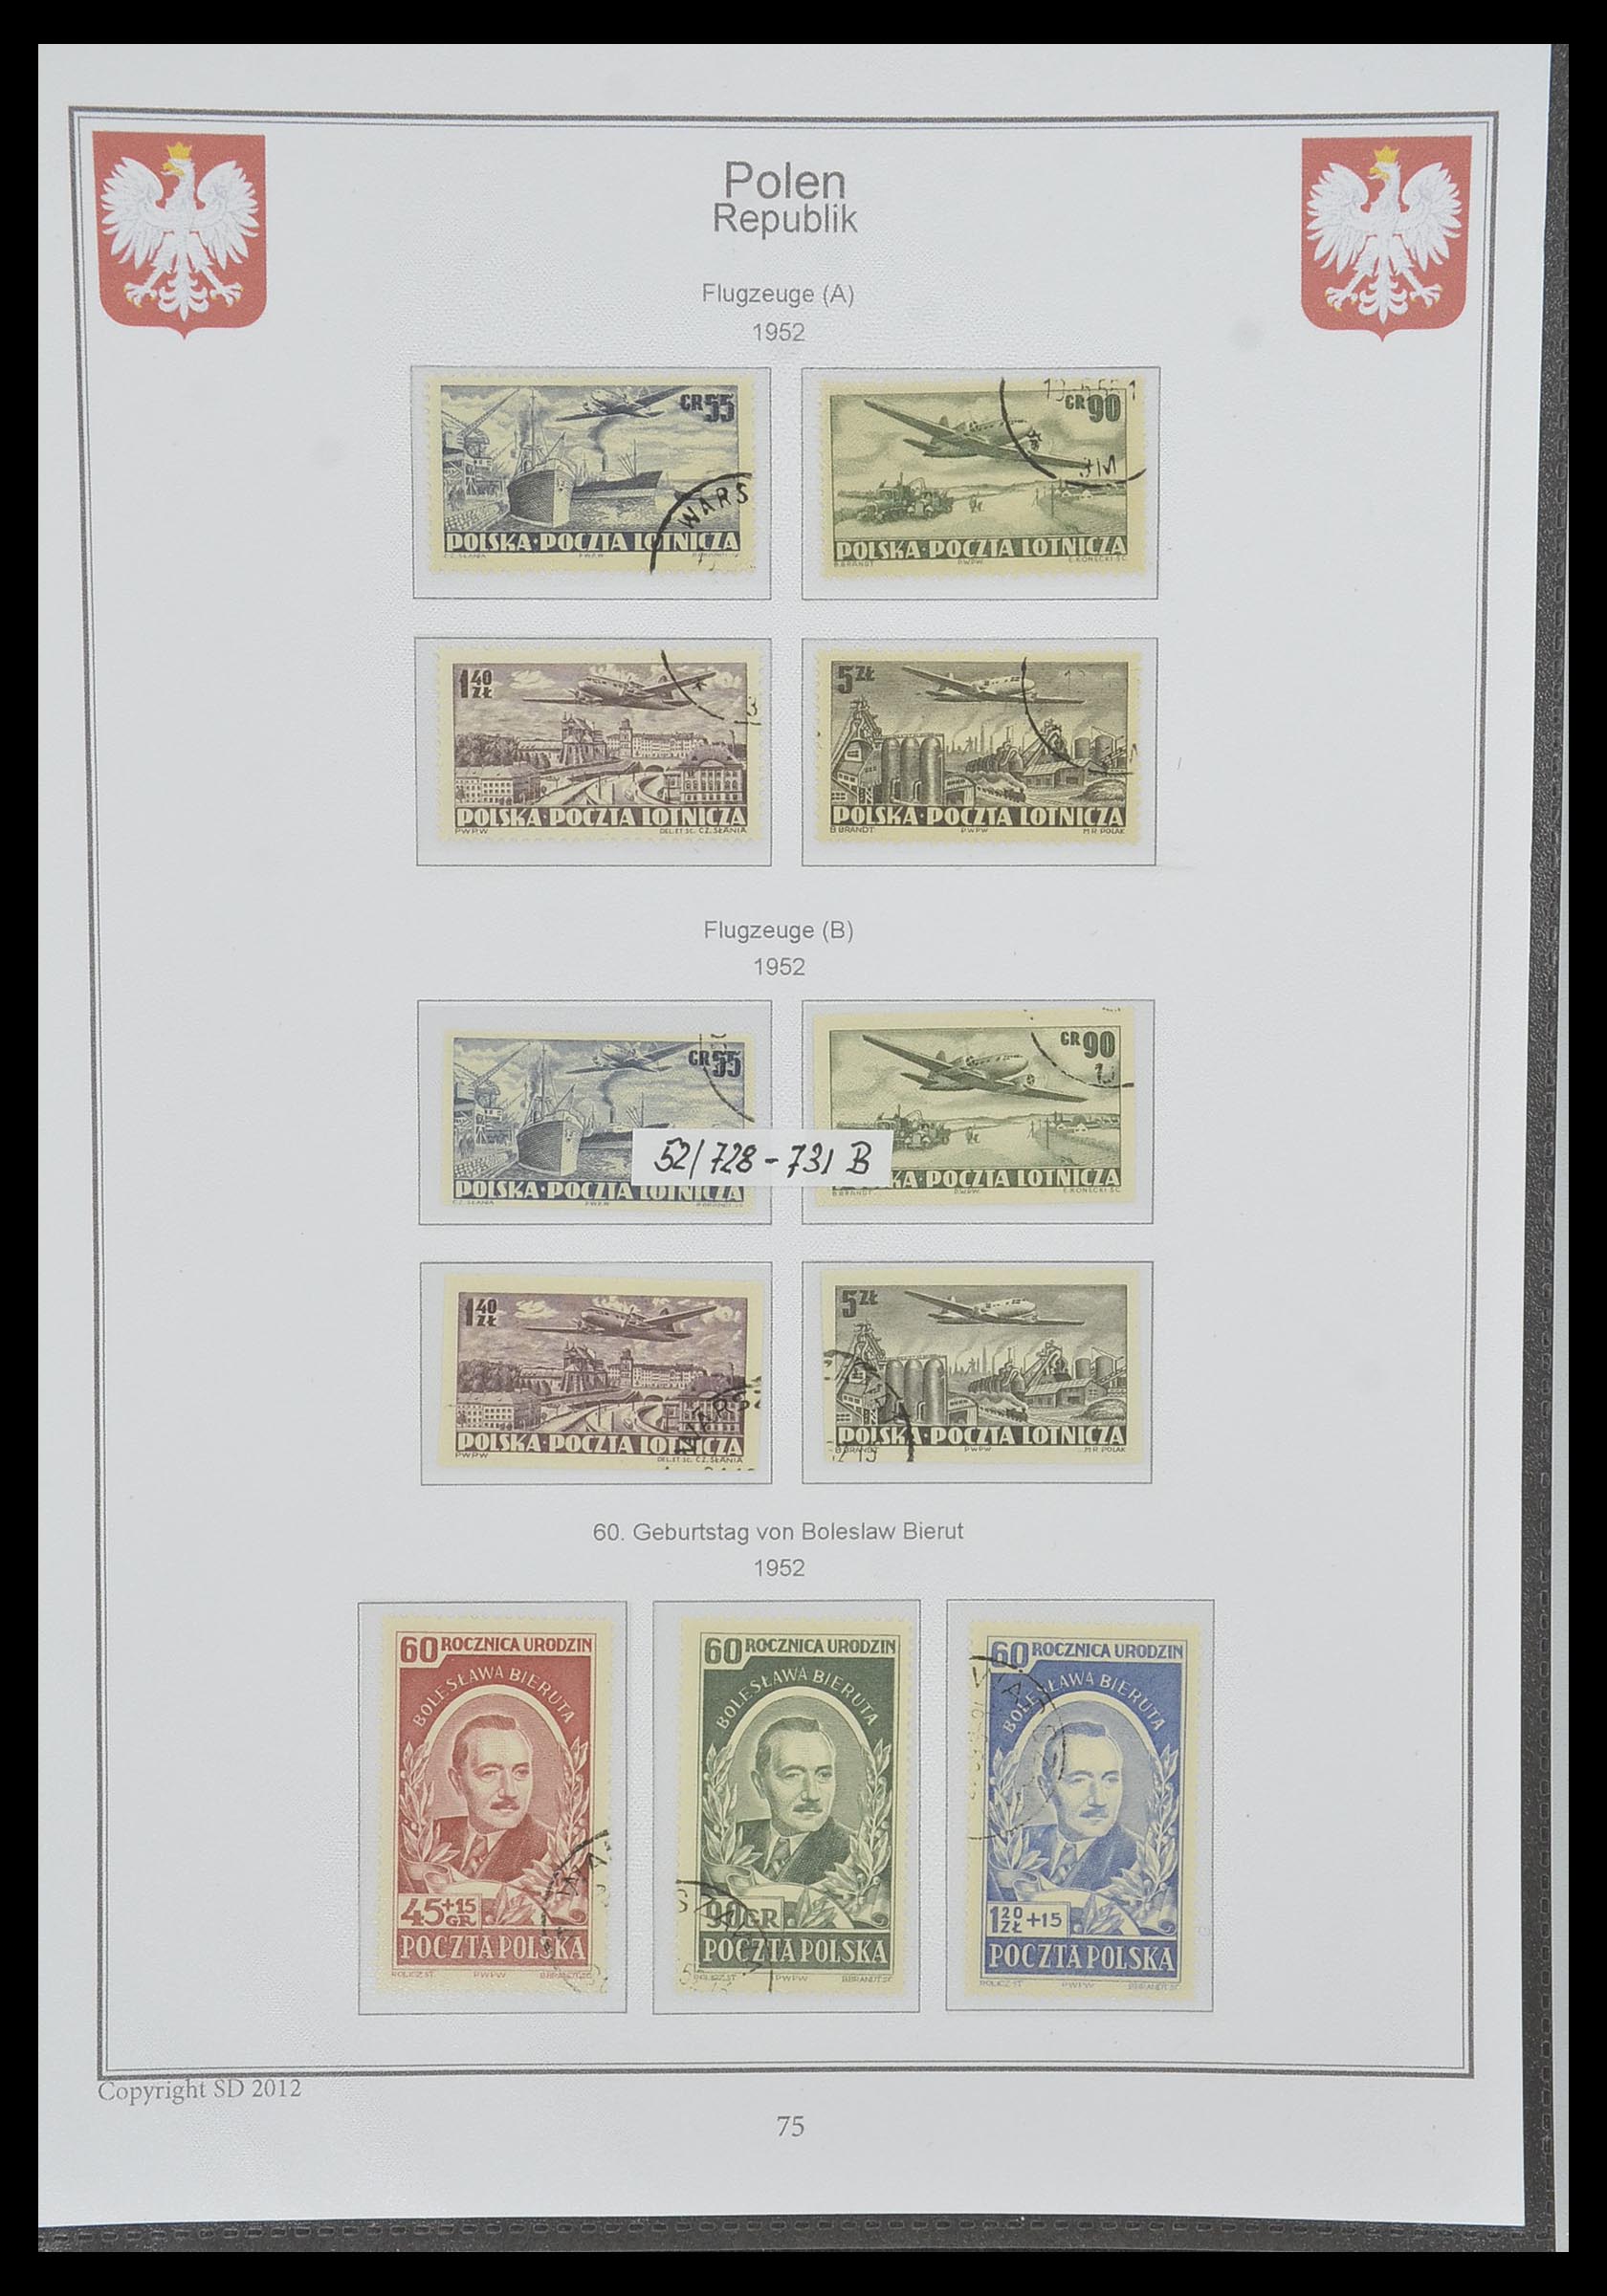 33977 068 - Stamp collection 33977 Poland 1860-2014.